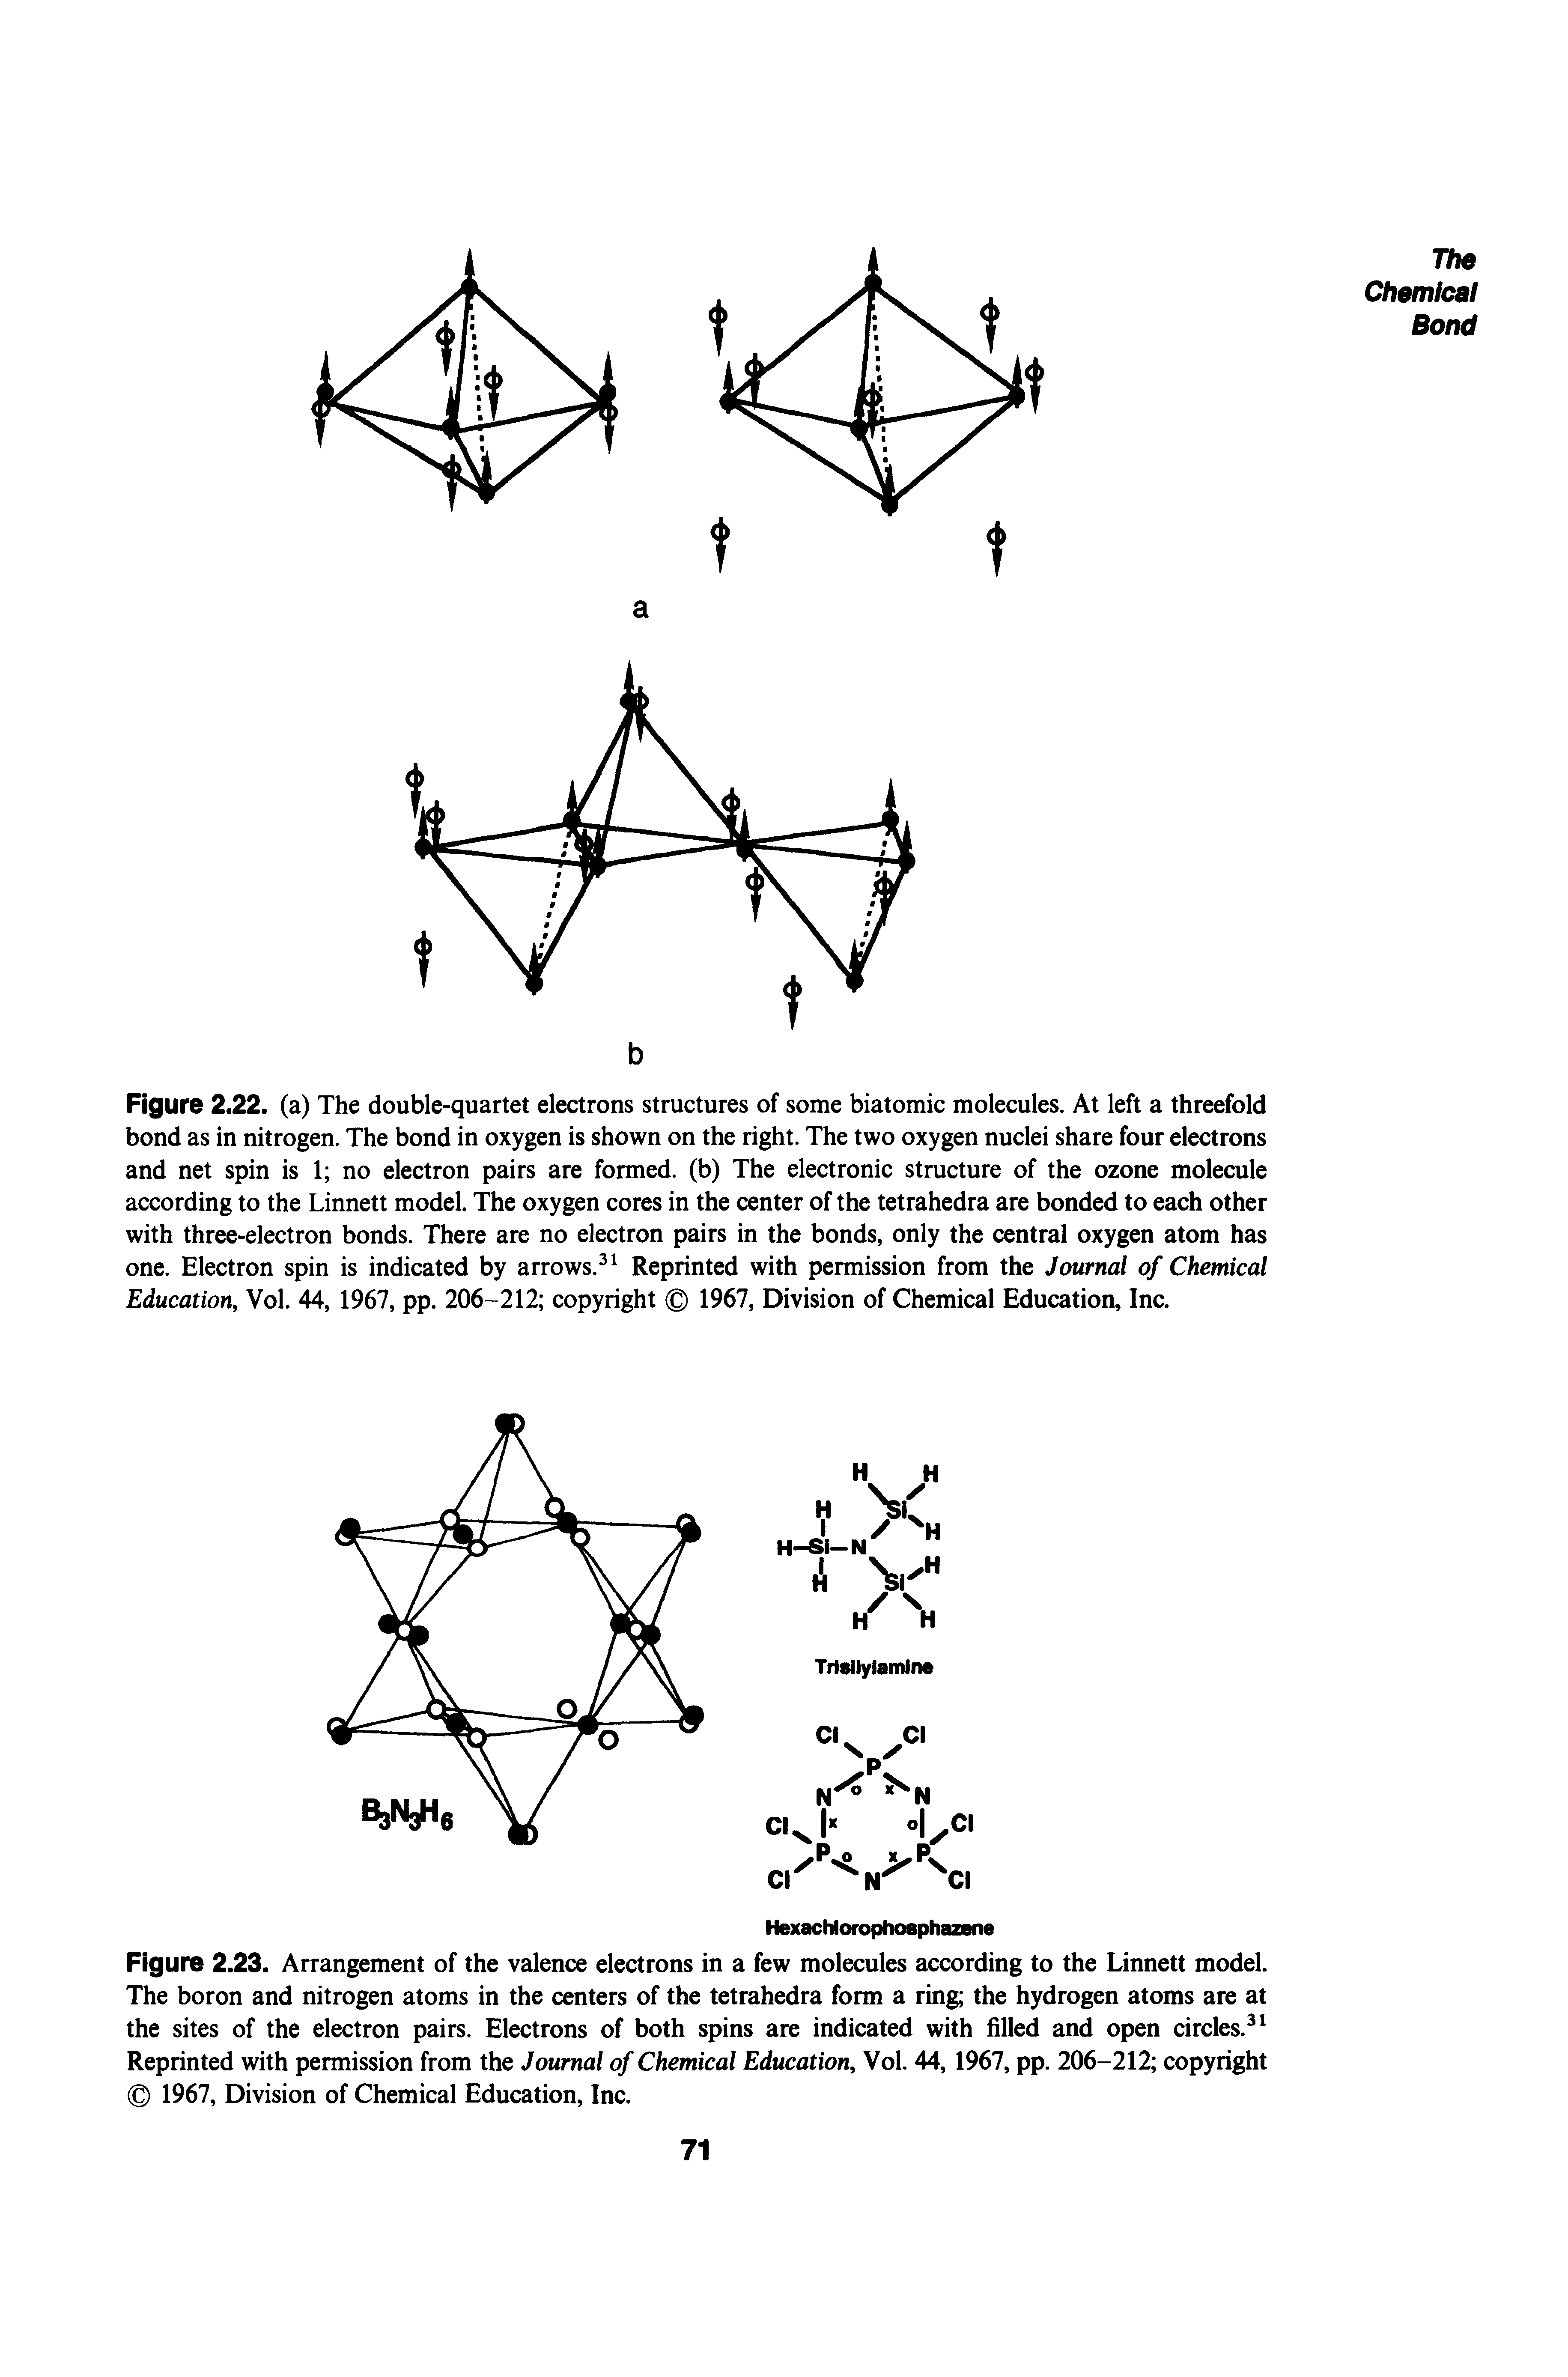 Figure 2.23. Arrangement of the valence electrons in a few molecules according to the Linnett model. The boron and nitrogen atoms in the centers of the tetrahedra form a ring the hydrogen atoms are at the sites of the electron pairs. Electrons of both spins are indicated with filled and open circles. Reprinted with permission from the Journal of Chemical Education, Vol. 44,1967, pp. 206-212 copyright 1967, Division of Chemical Education, Inc.